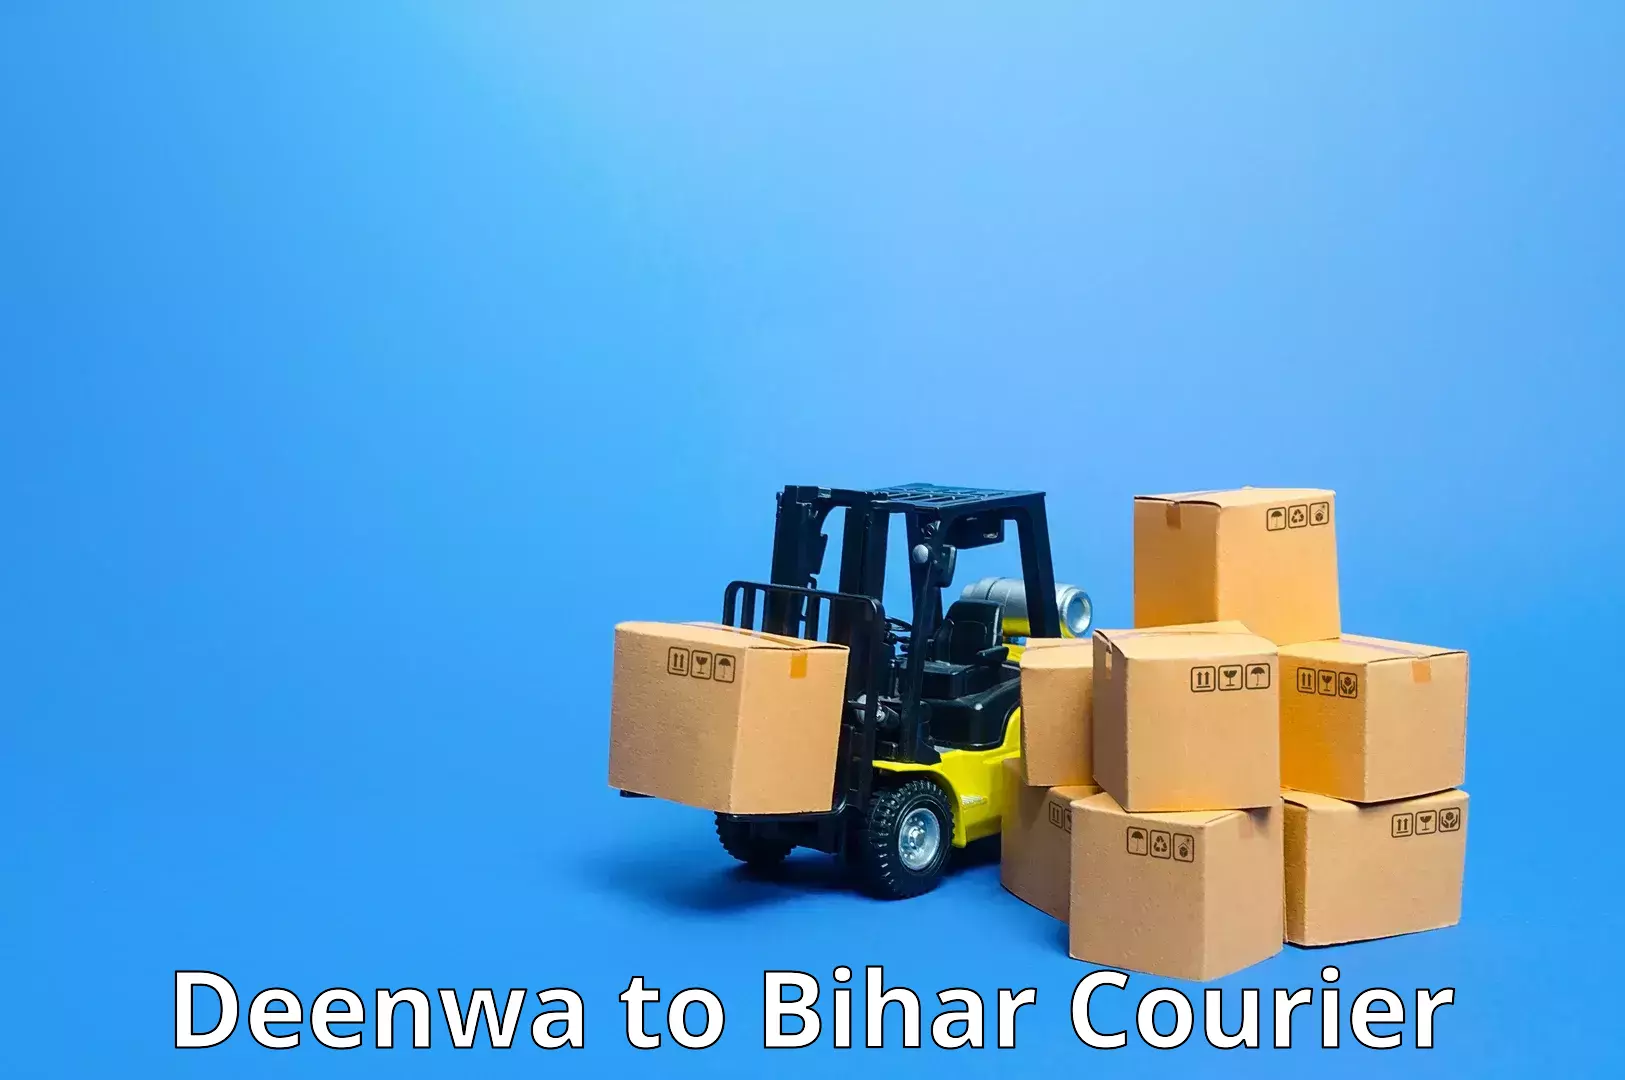 Advanced tracking systems Deenwa to Dighwara